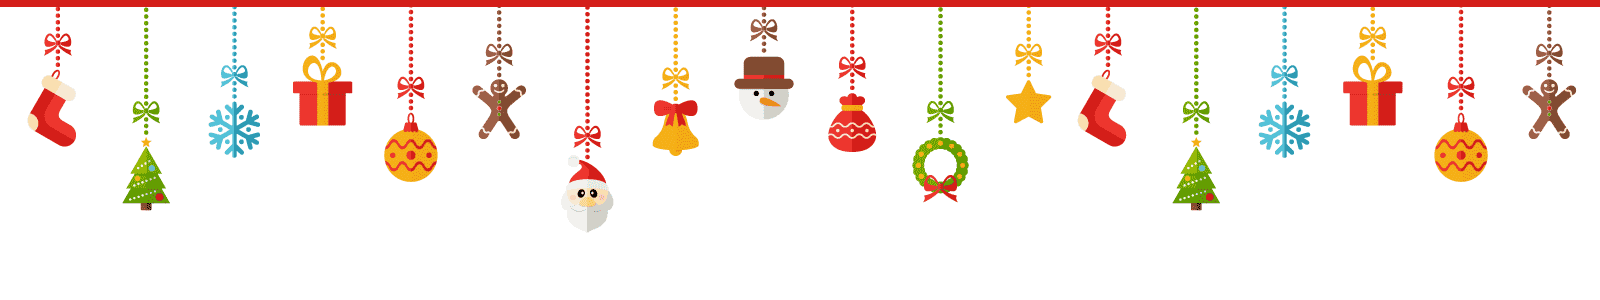 holiday ornaments banner